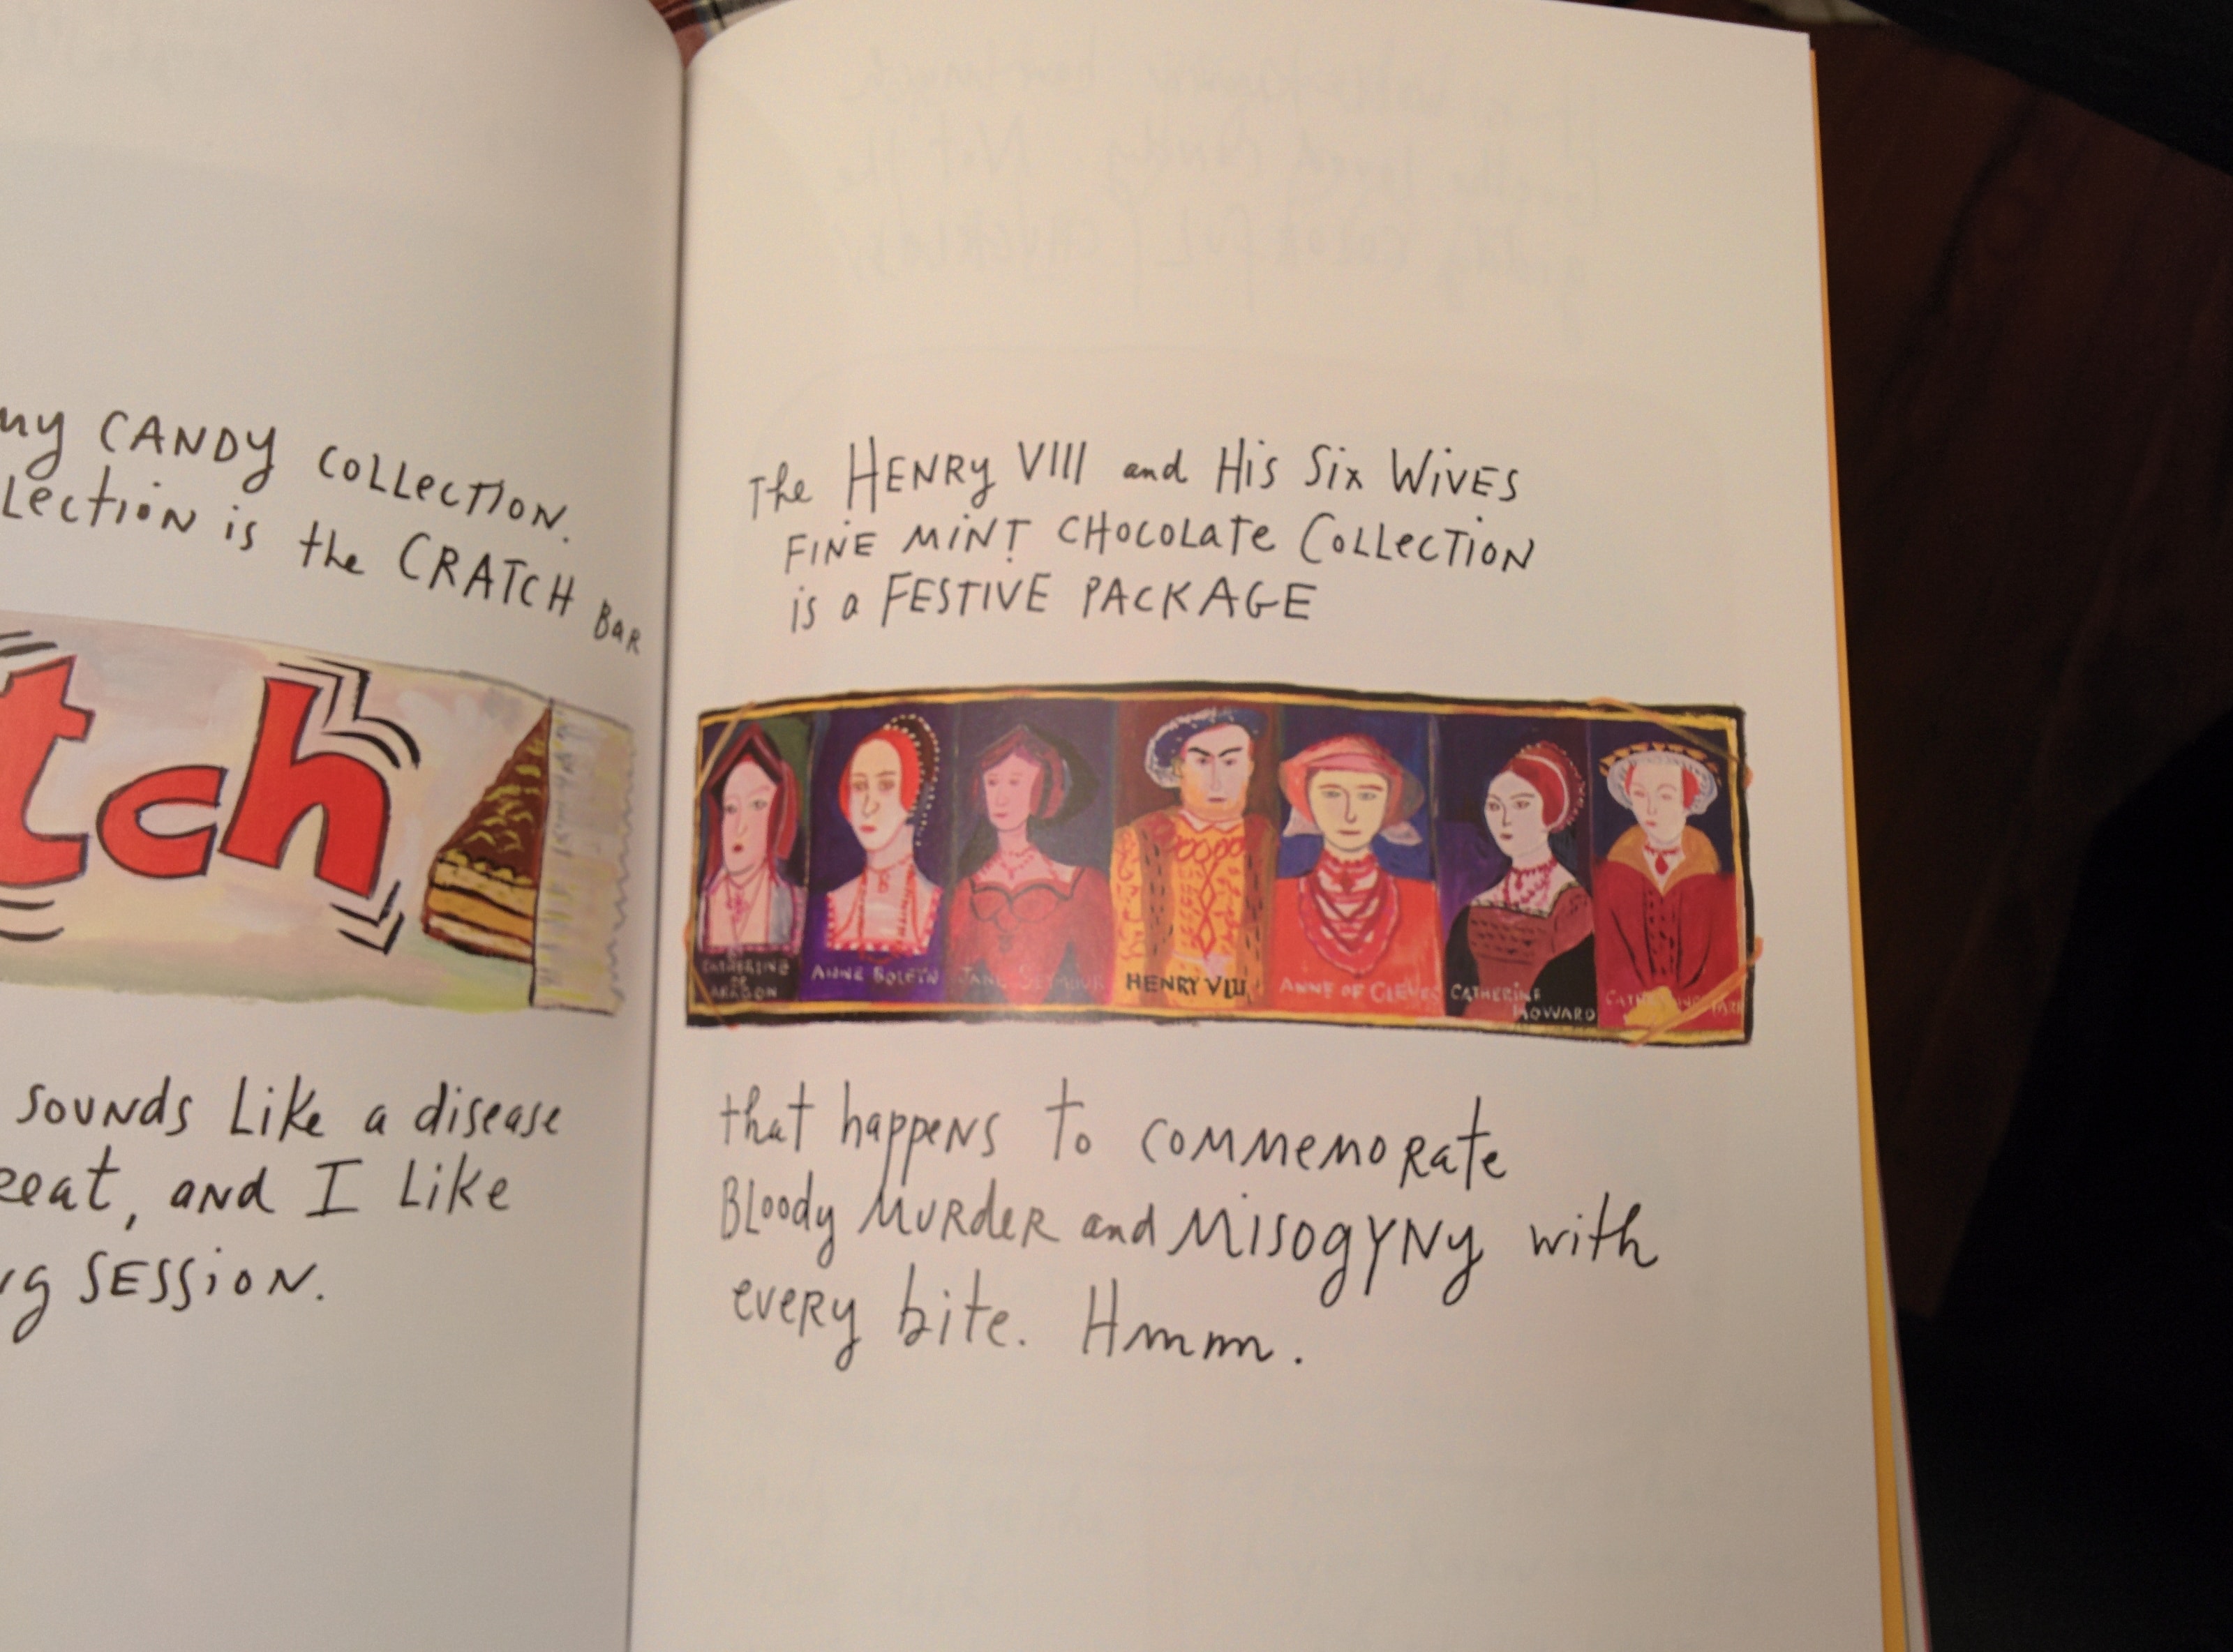 The Principles of Uncertainty, by Maira Kalman